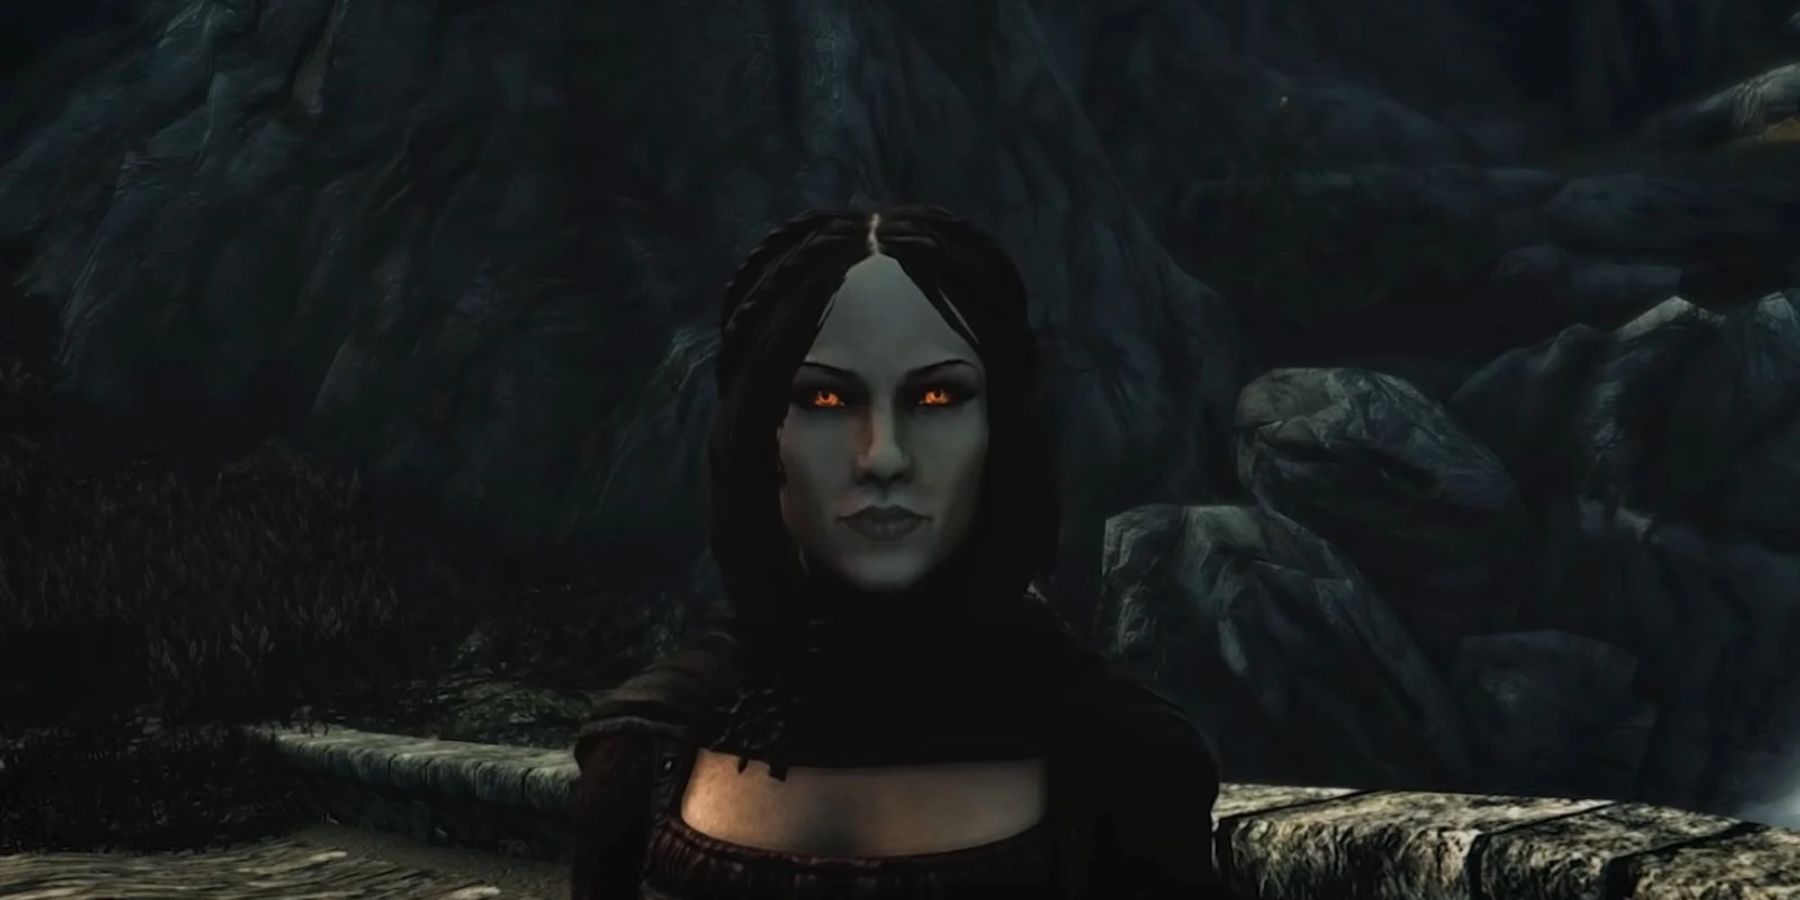 Elder Scrolls 6s Vampires Should Play With Morality